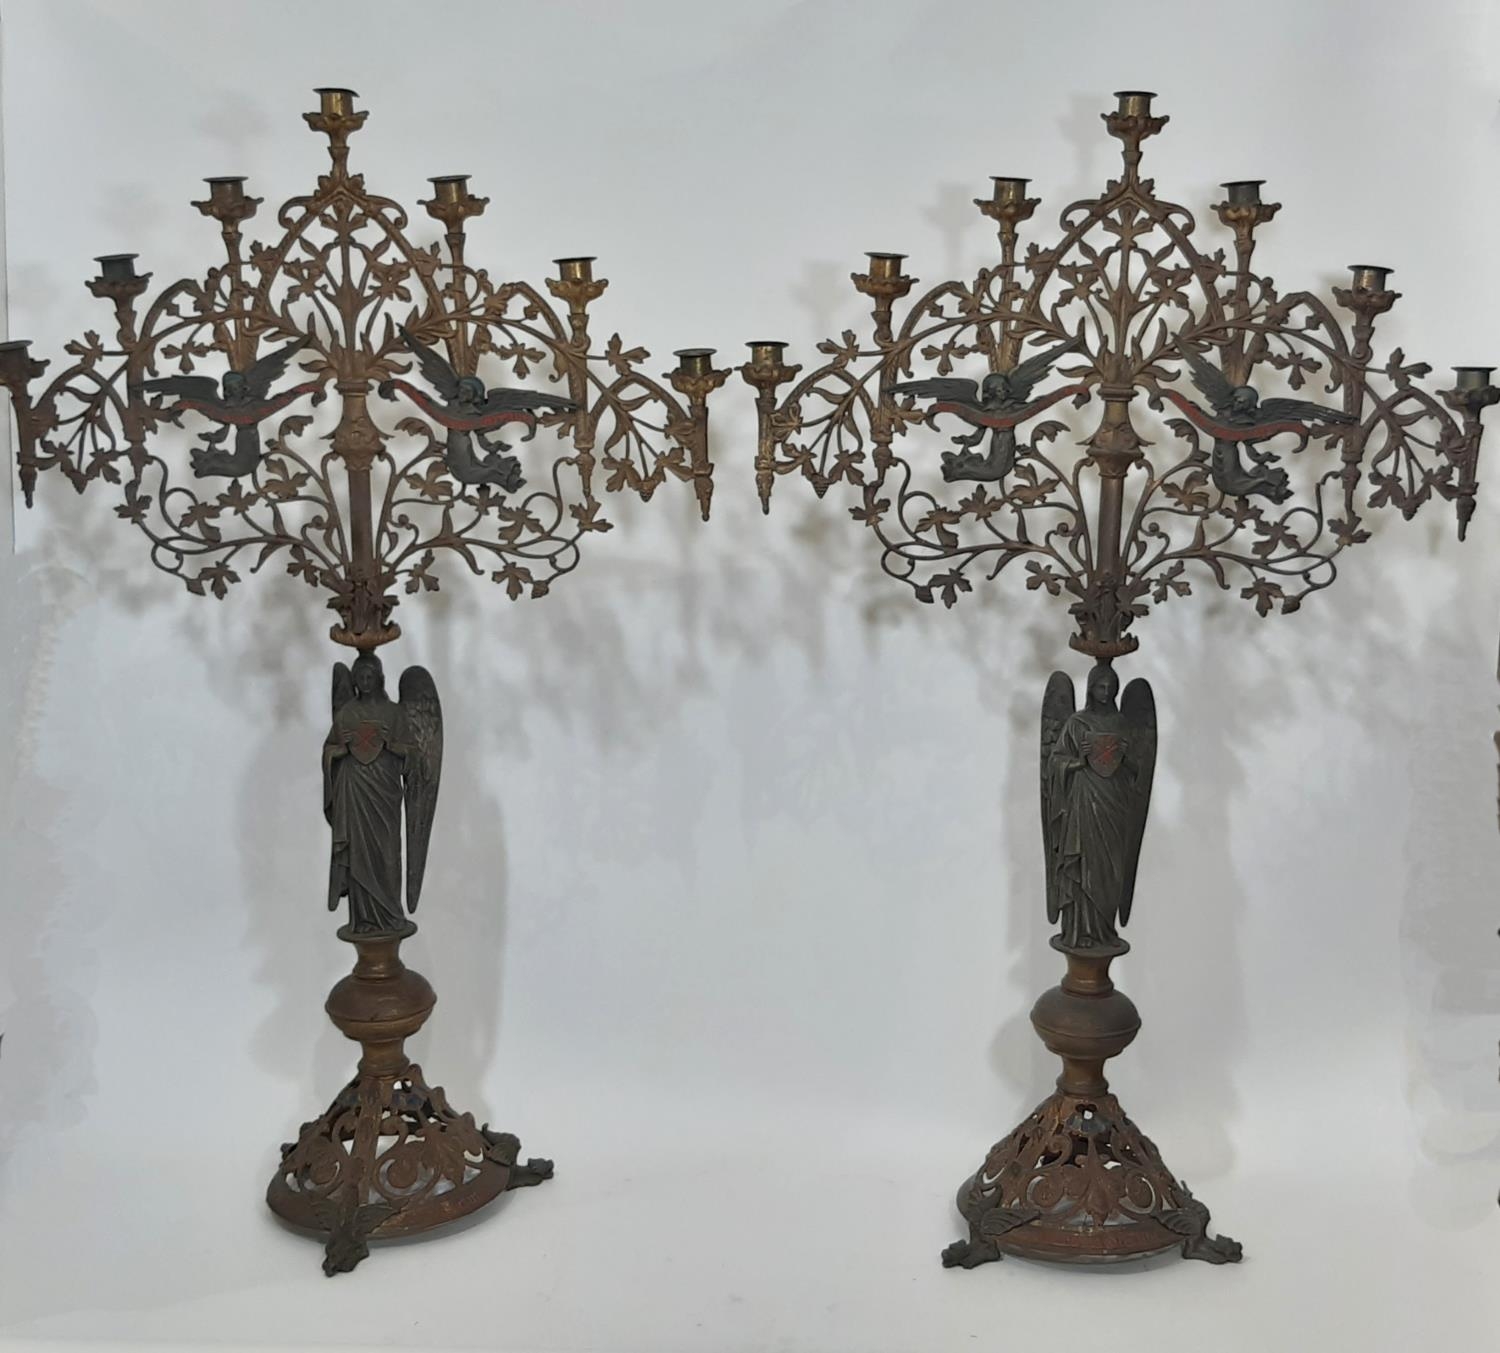 A substantial and impressive pair of 19th century seven-light ecclesiastical enamelled brass